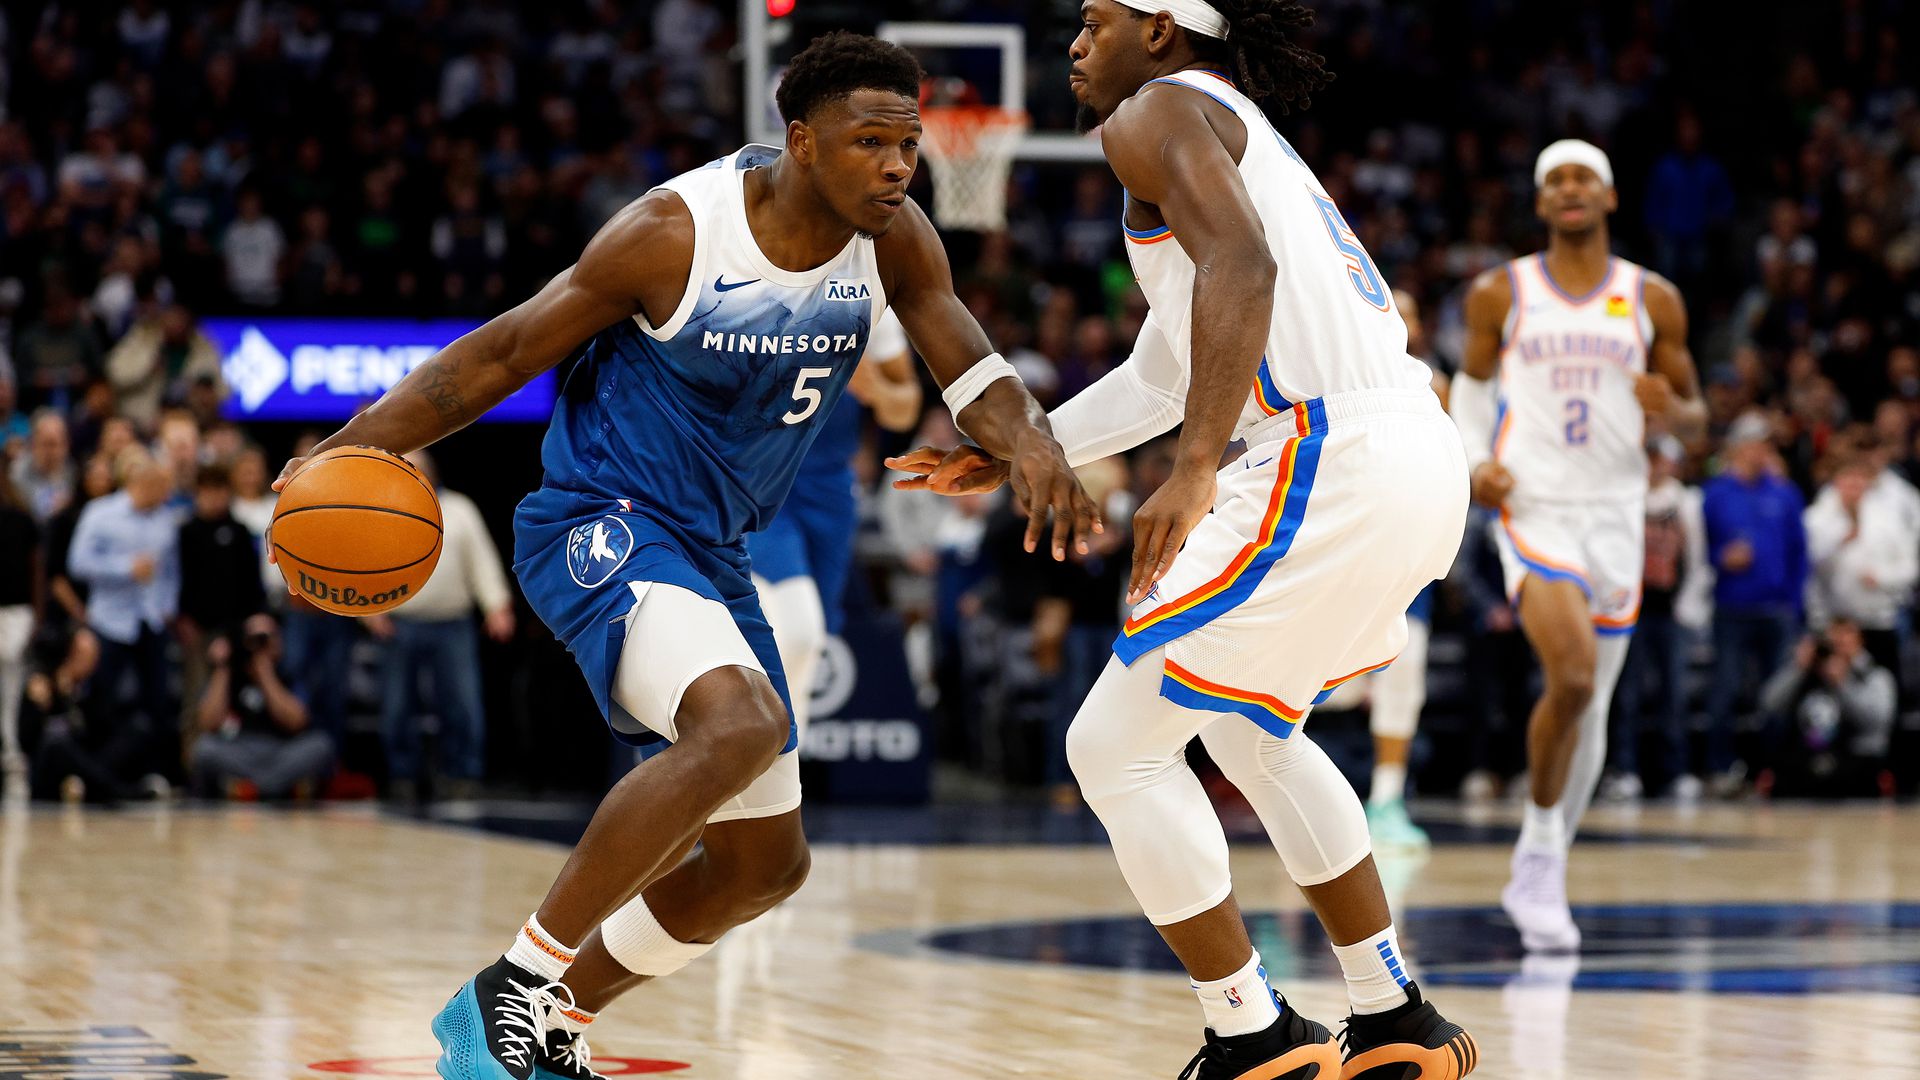 thunder 102, wolves 97: an ugly choke job in playoff-like atmosphere